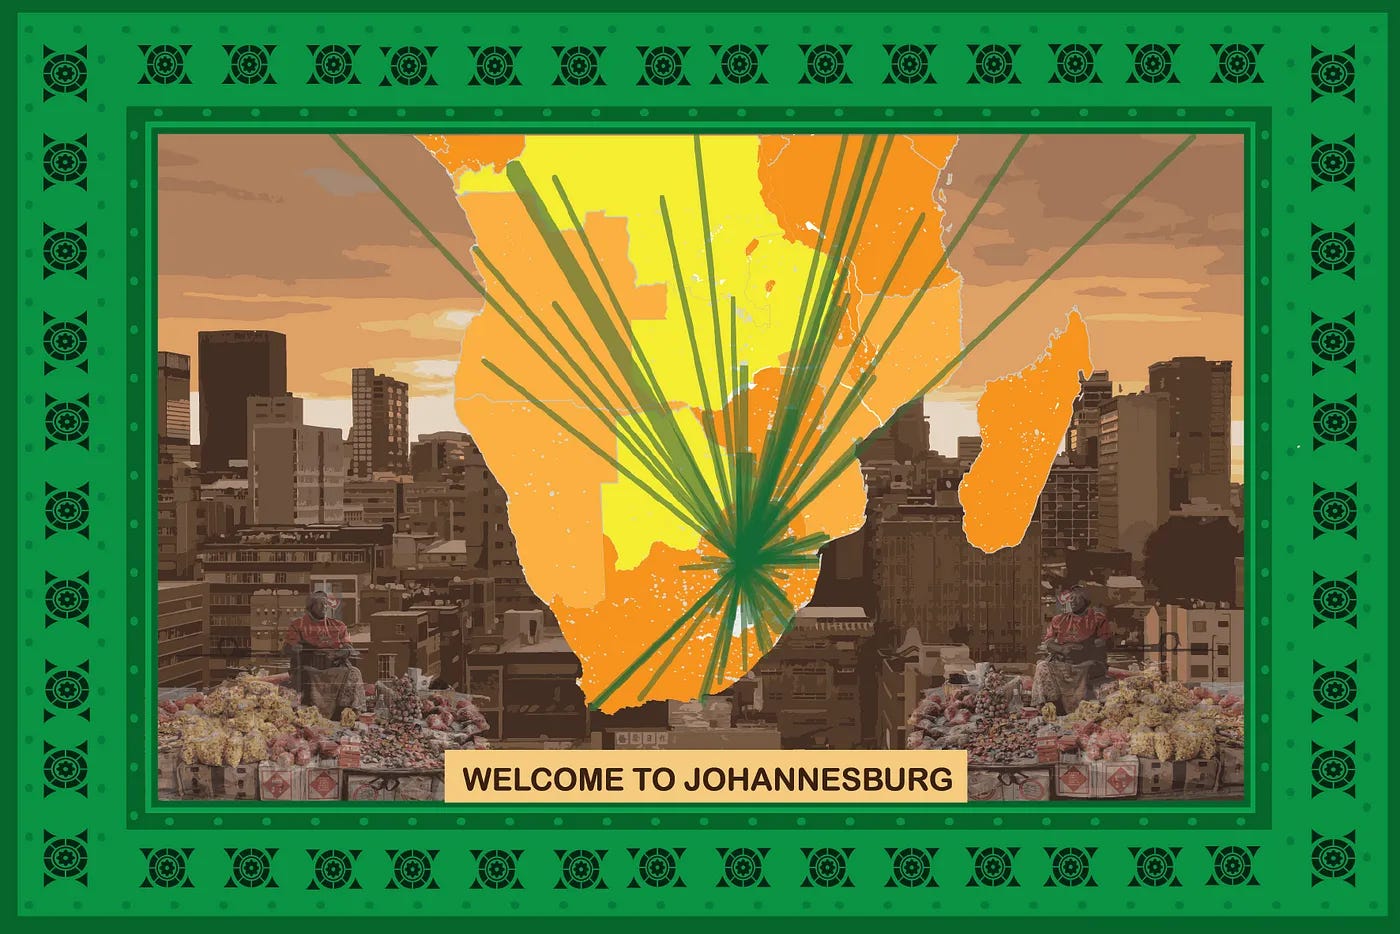 A wax-print style cloth with a photo of Johannesburg and a map showing the routes that migrants take into the city superimposed on it